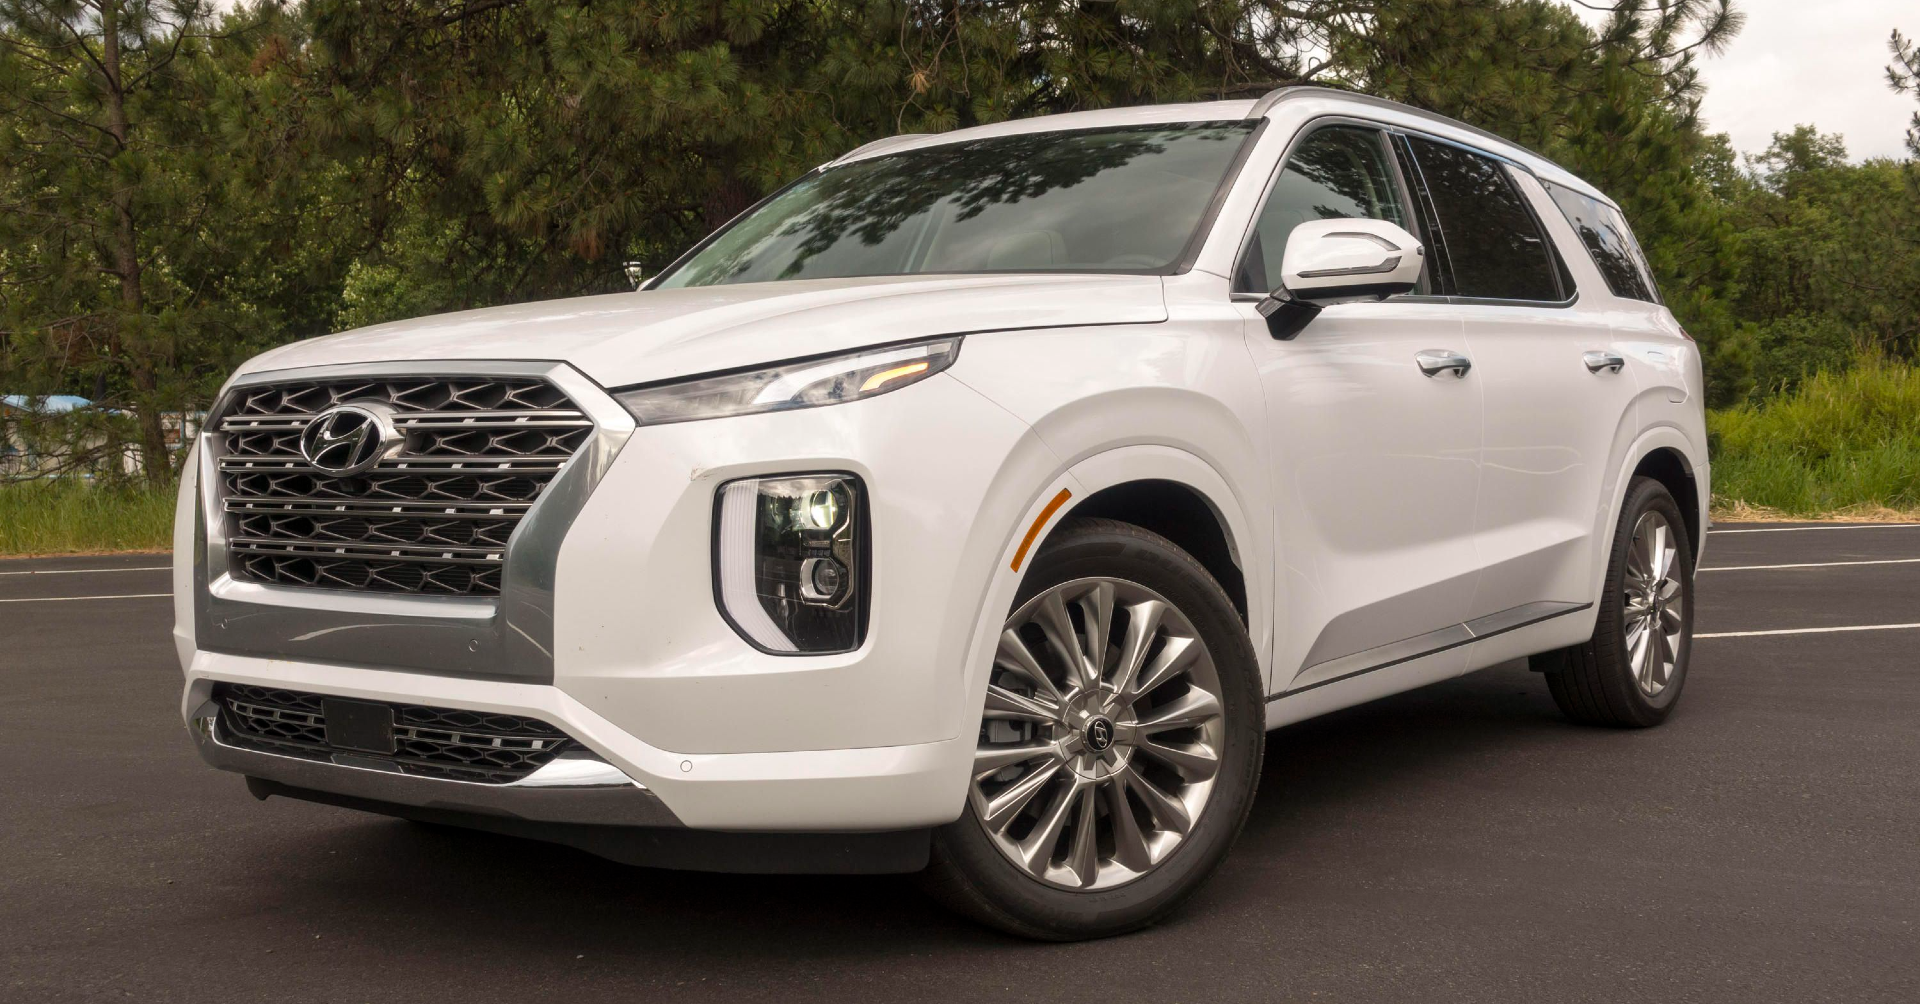 The Hyundai Palisade is Right for You